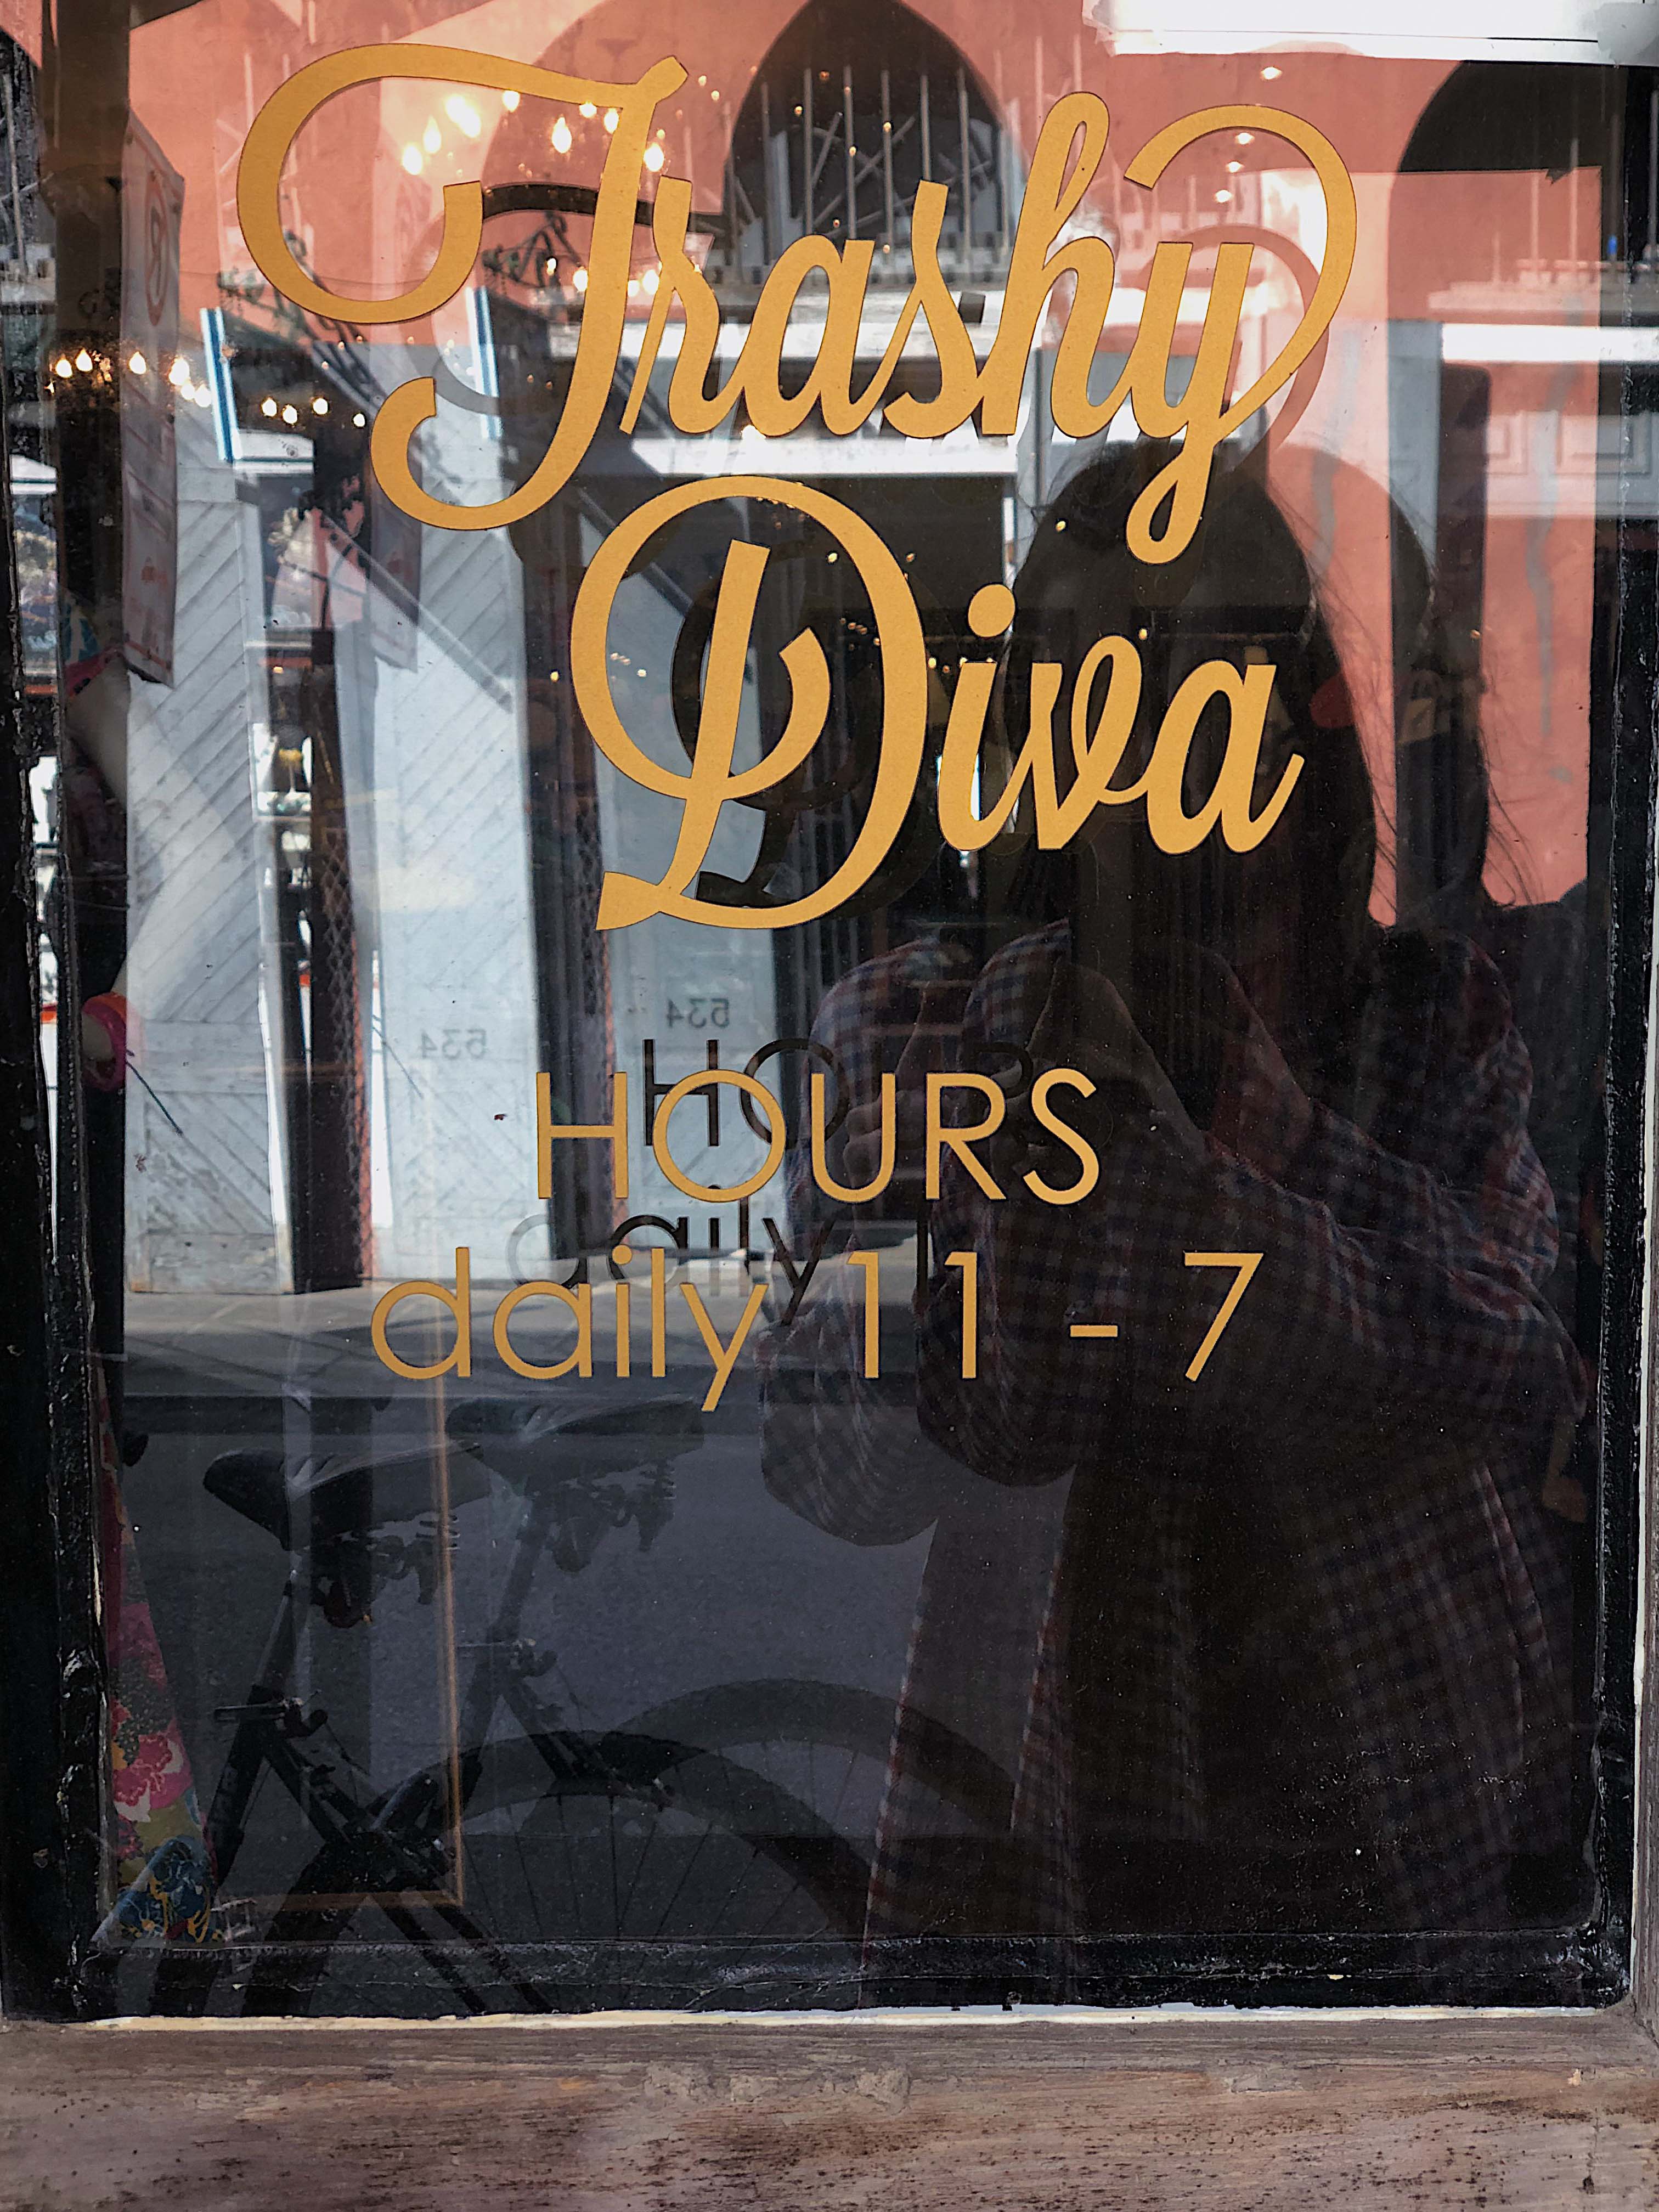 Trashy Diva - Vintage shopping in New Orleans on Royal Street French Quarter - New Orleans Travel Guide - NOLA City guide - by fashion blogger Julia Comil